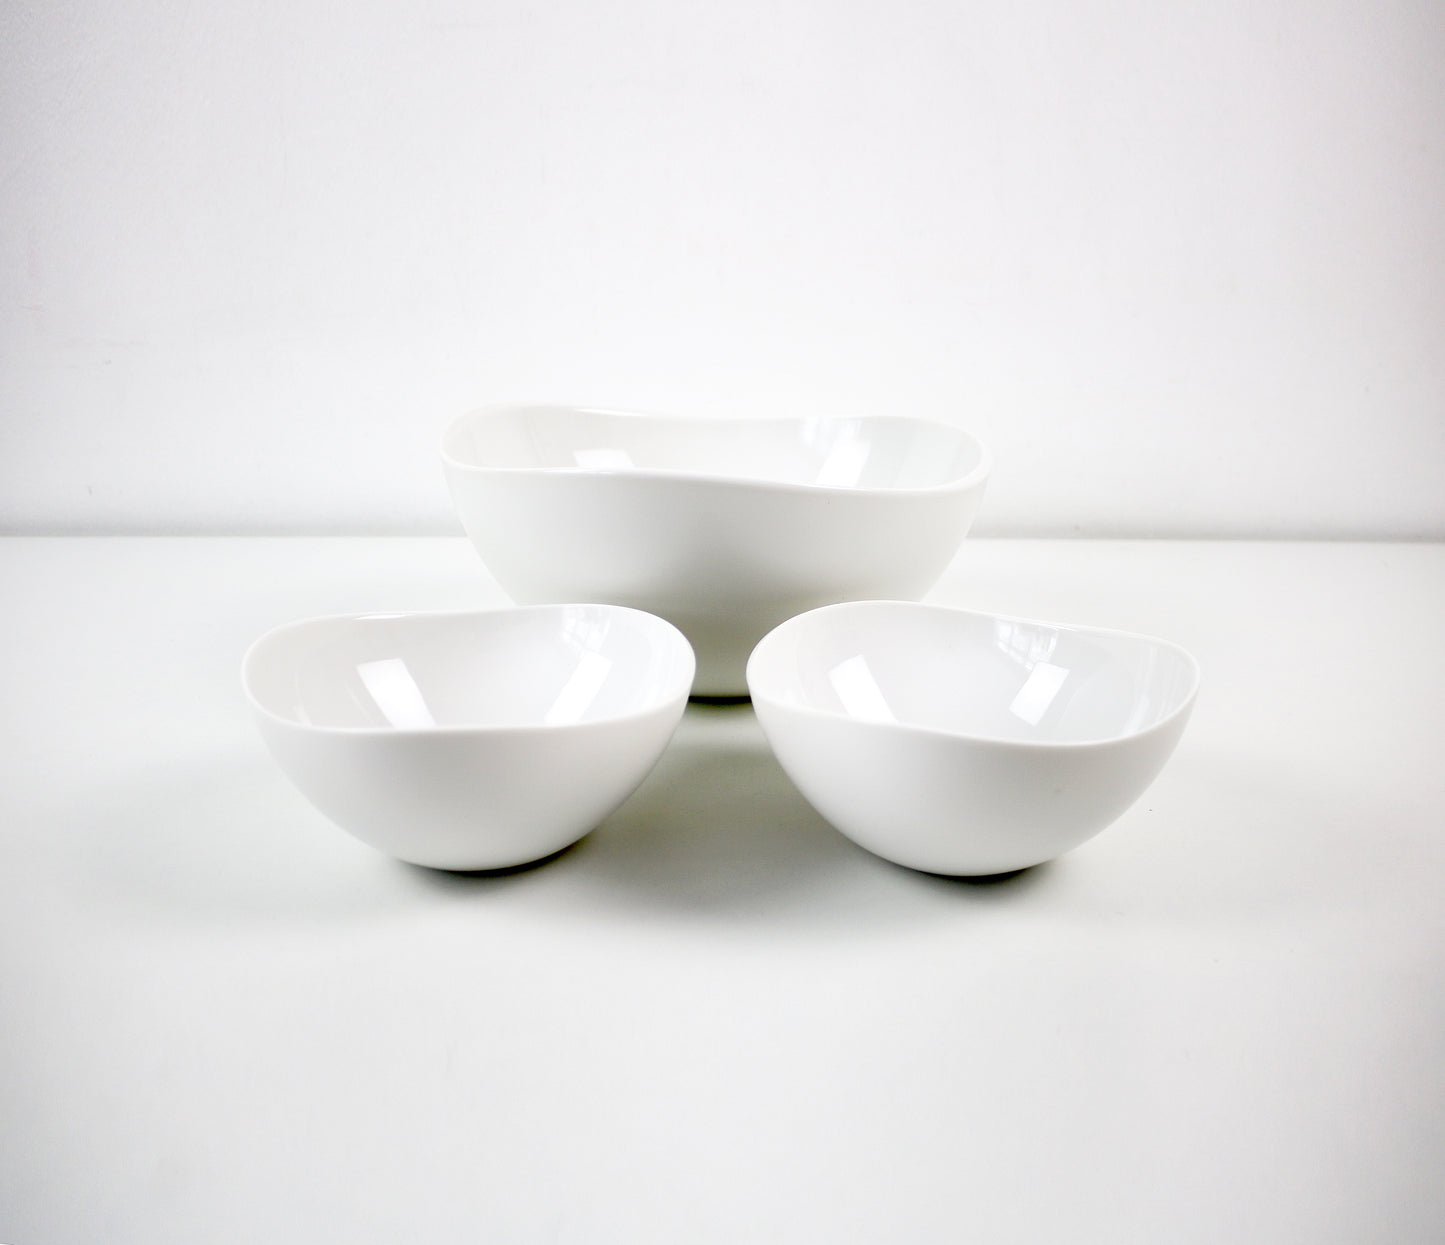 Wovo set of 3 serving bowls in white. Unused early 2000s vintage stock